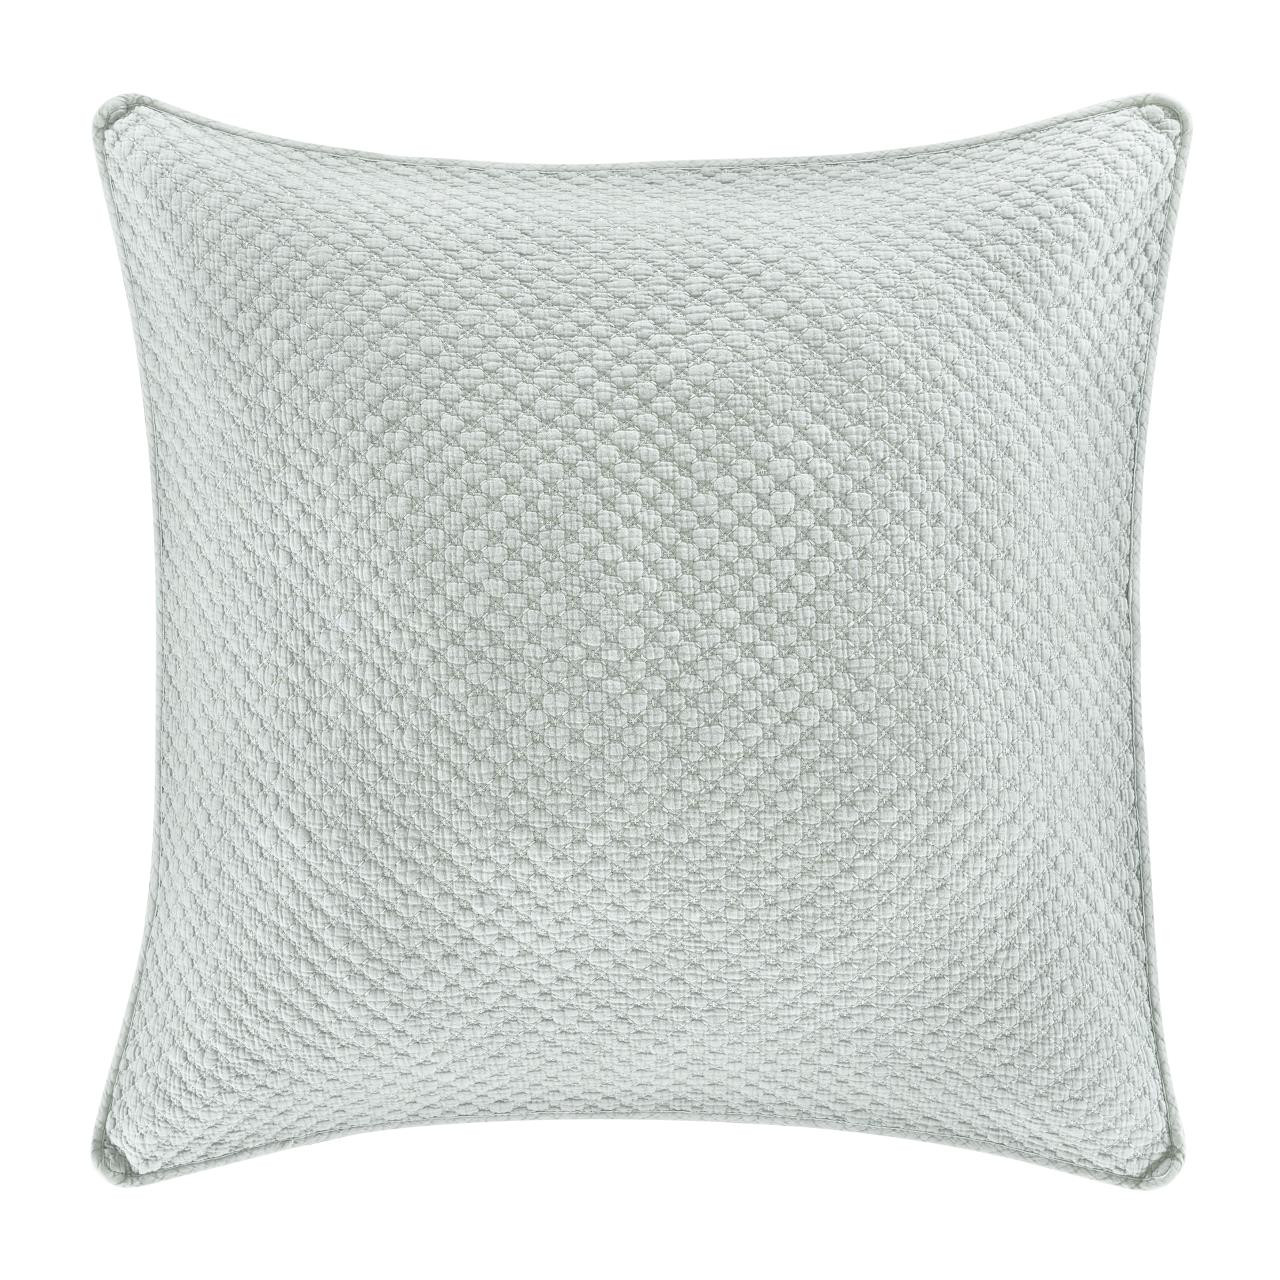 https://cdn10.bigcommerce.com/s-9ese1/products/20380/images/125198/Emery-Sea-Foam-18-Square-Pillow-193842117101_image1__97134.1623572601.1280.1280.jpg?c=2